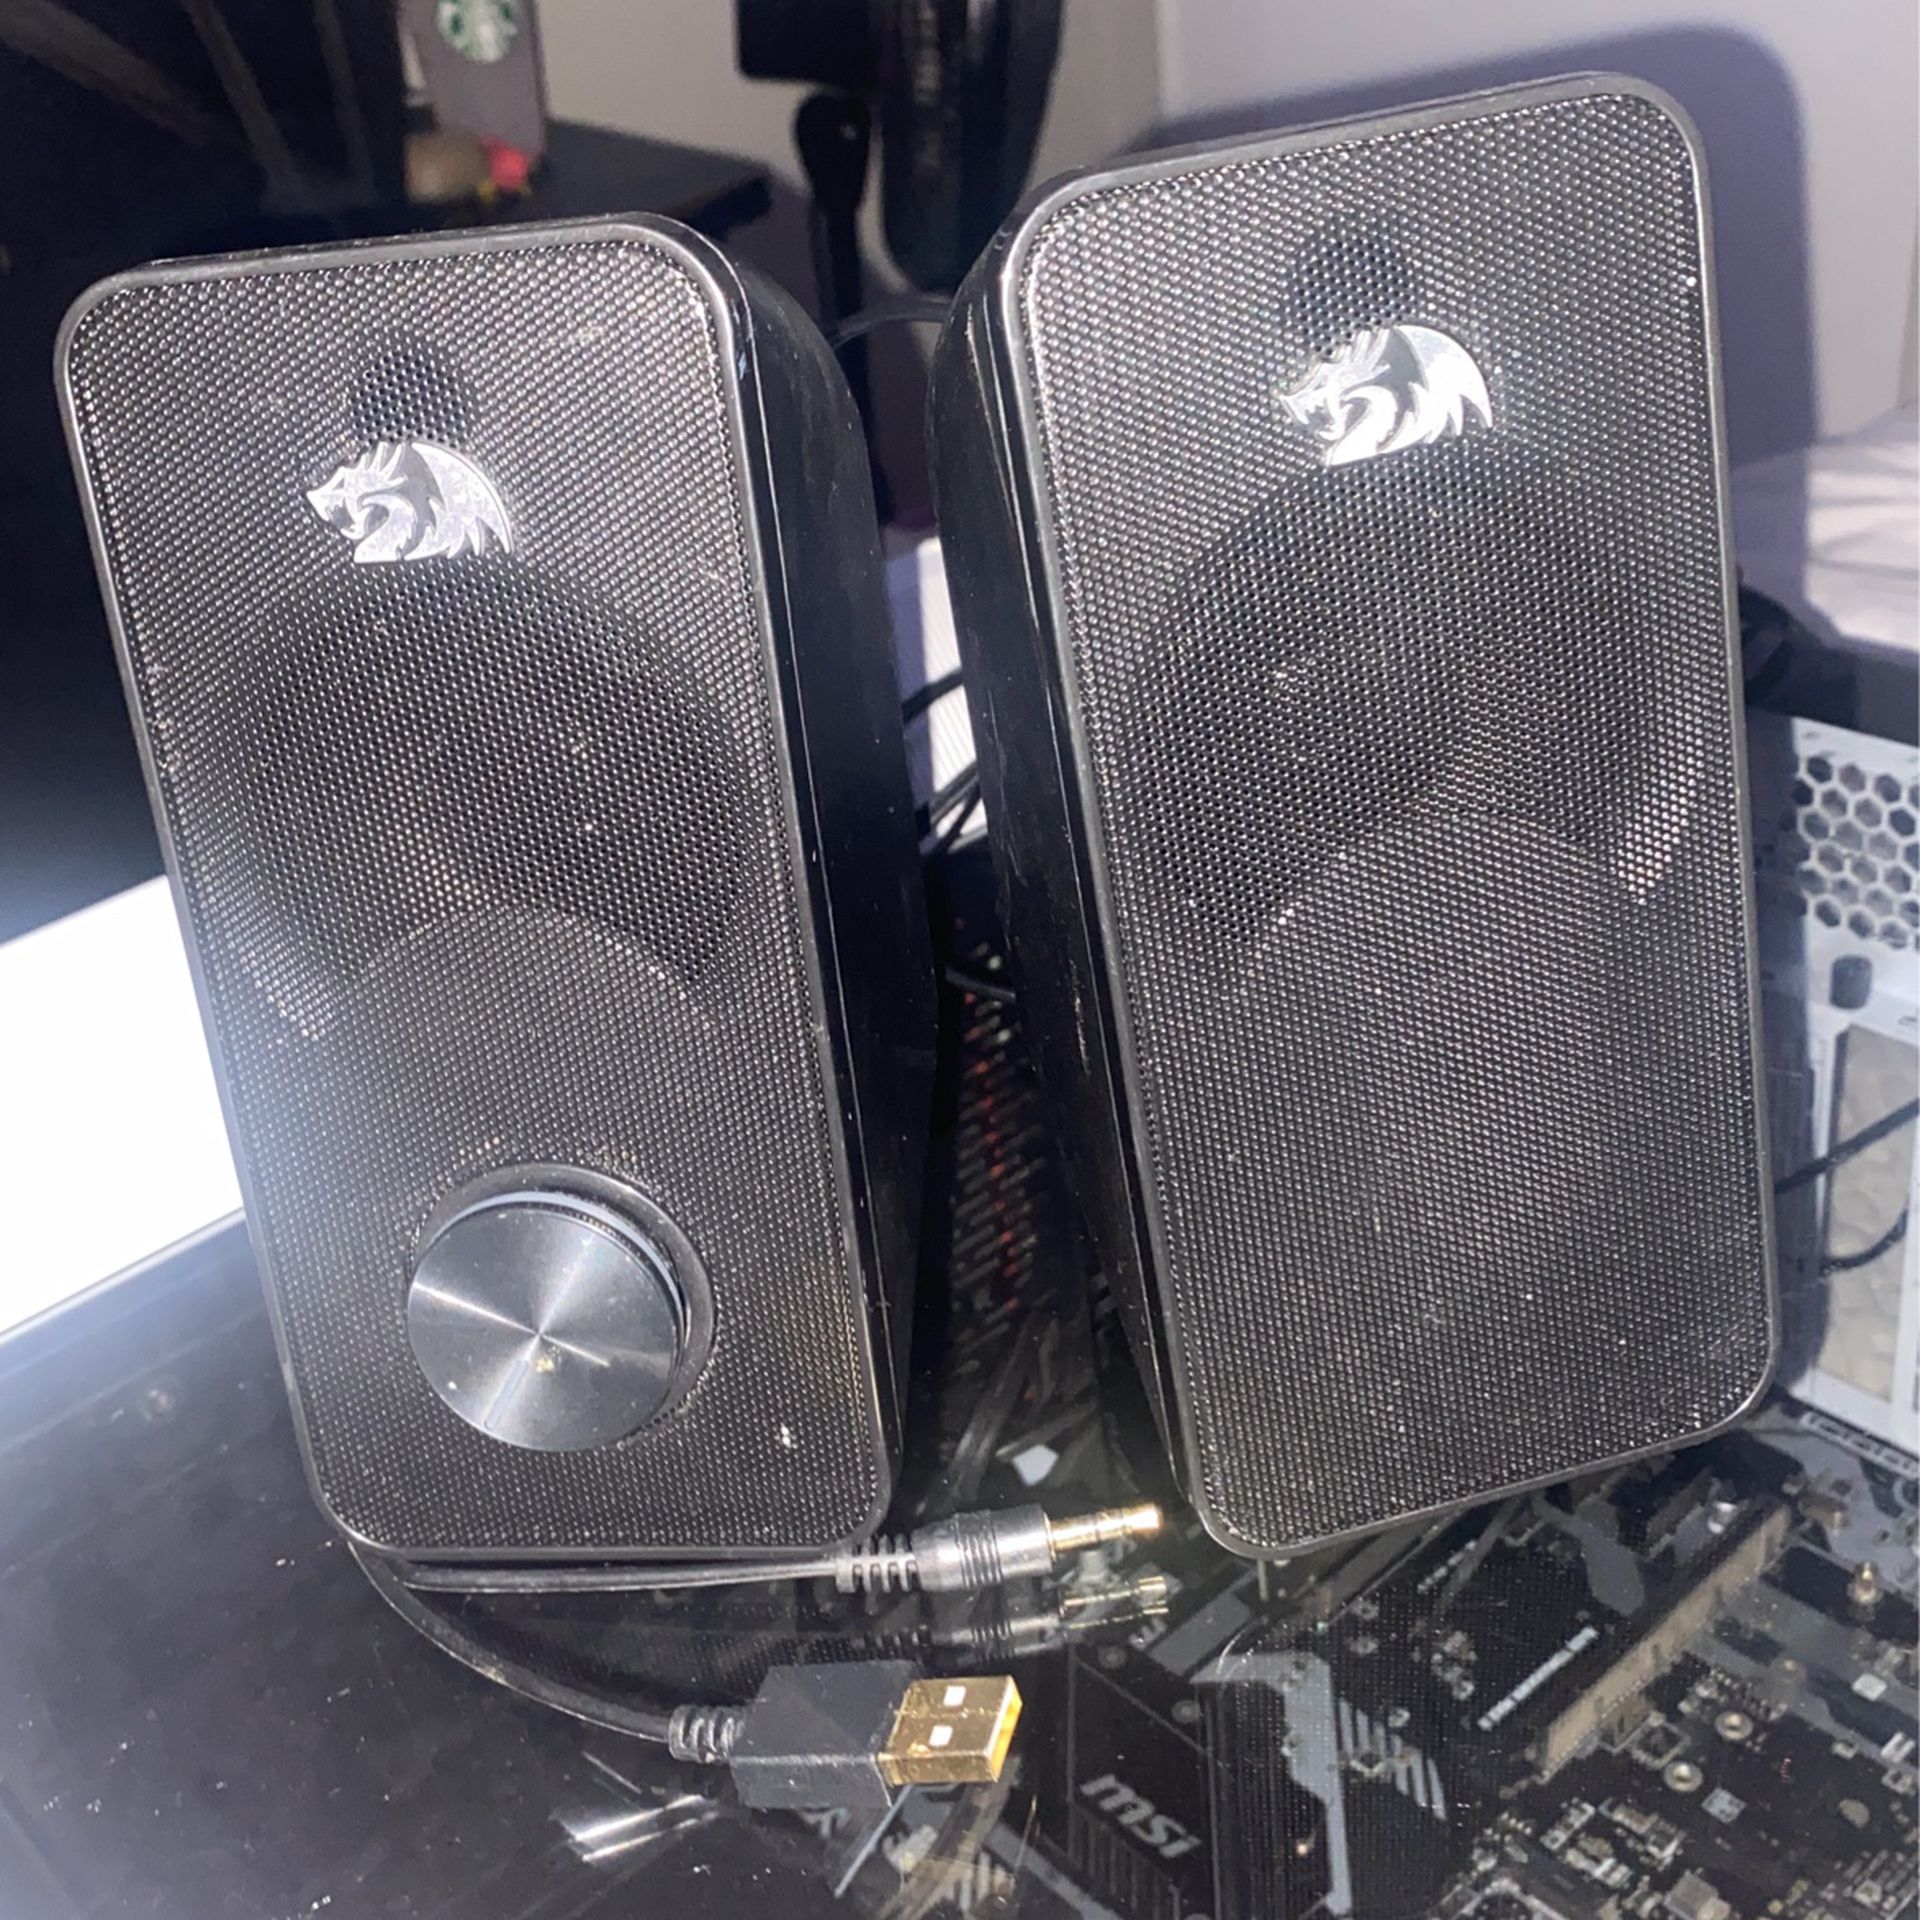 I Red Dragon Speakers for Pc 